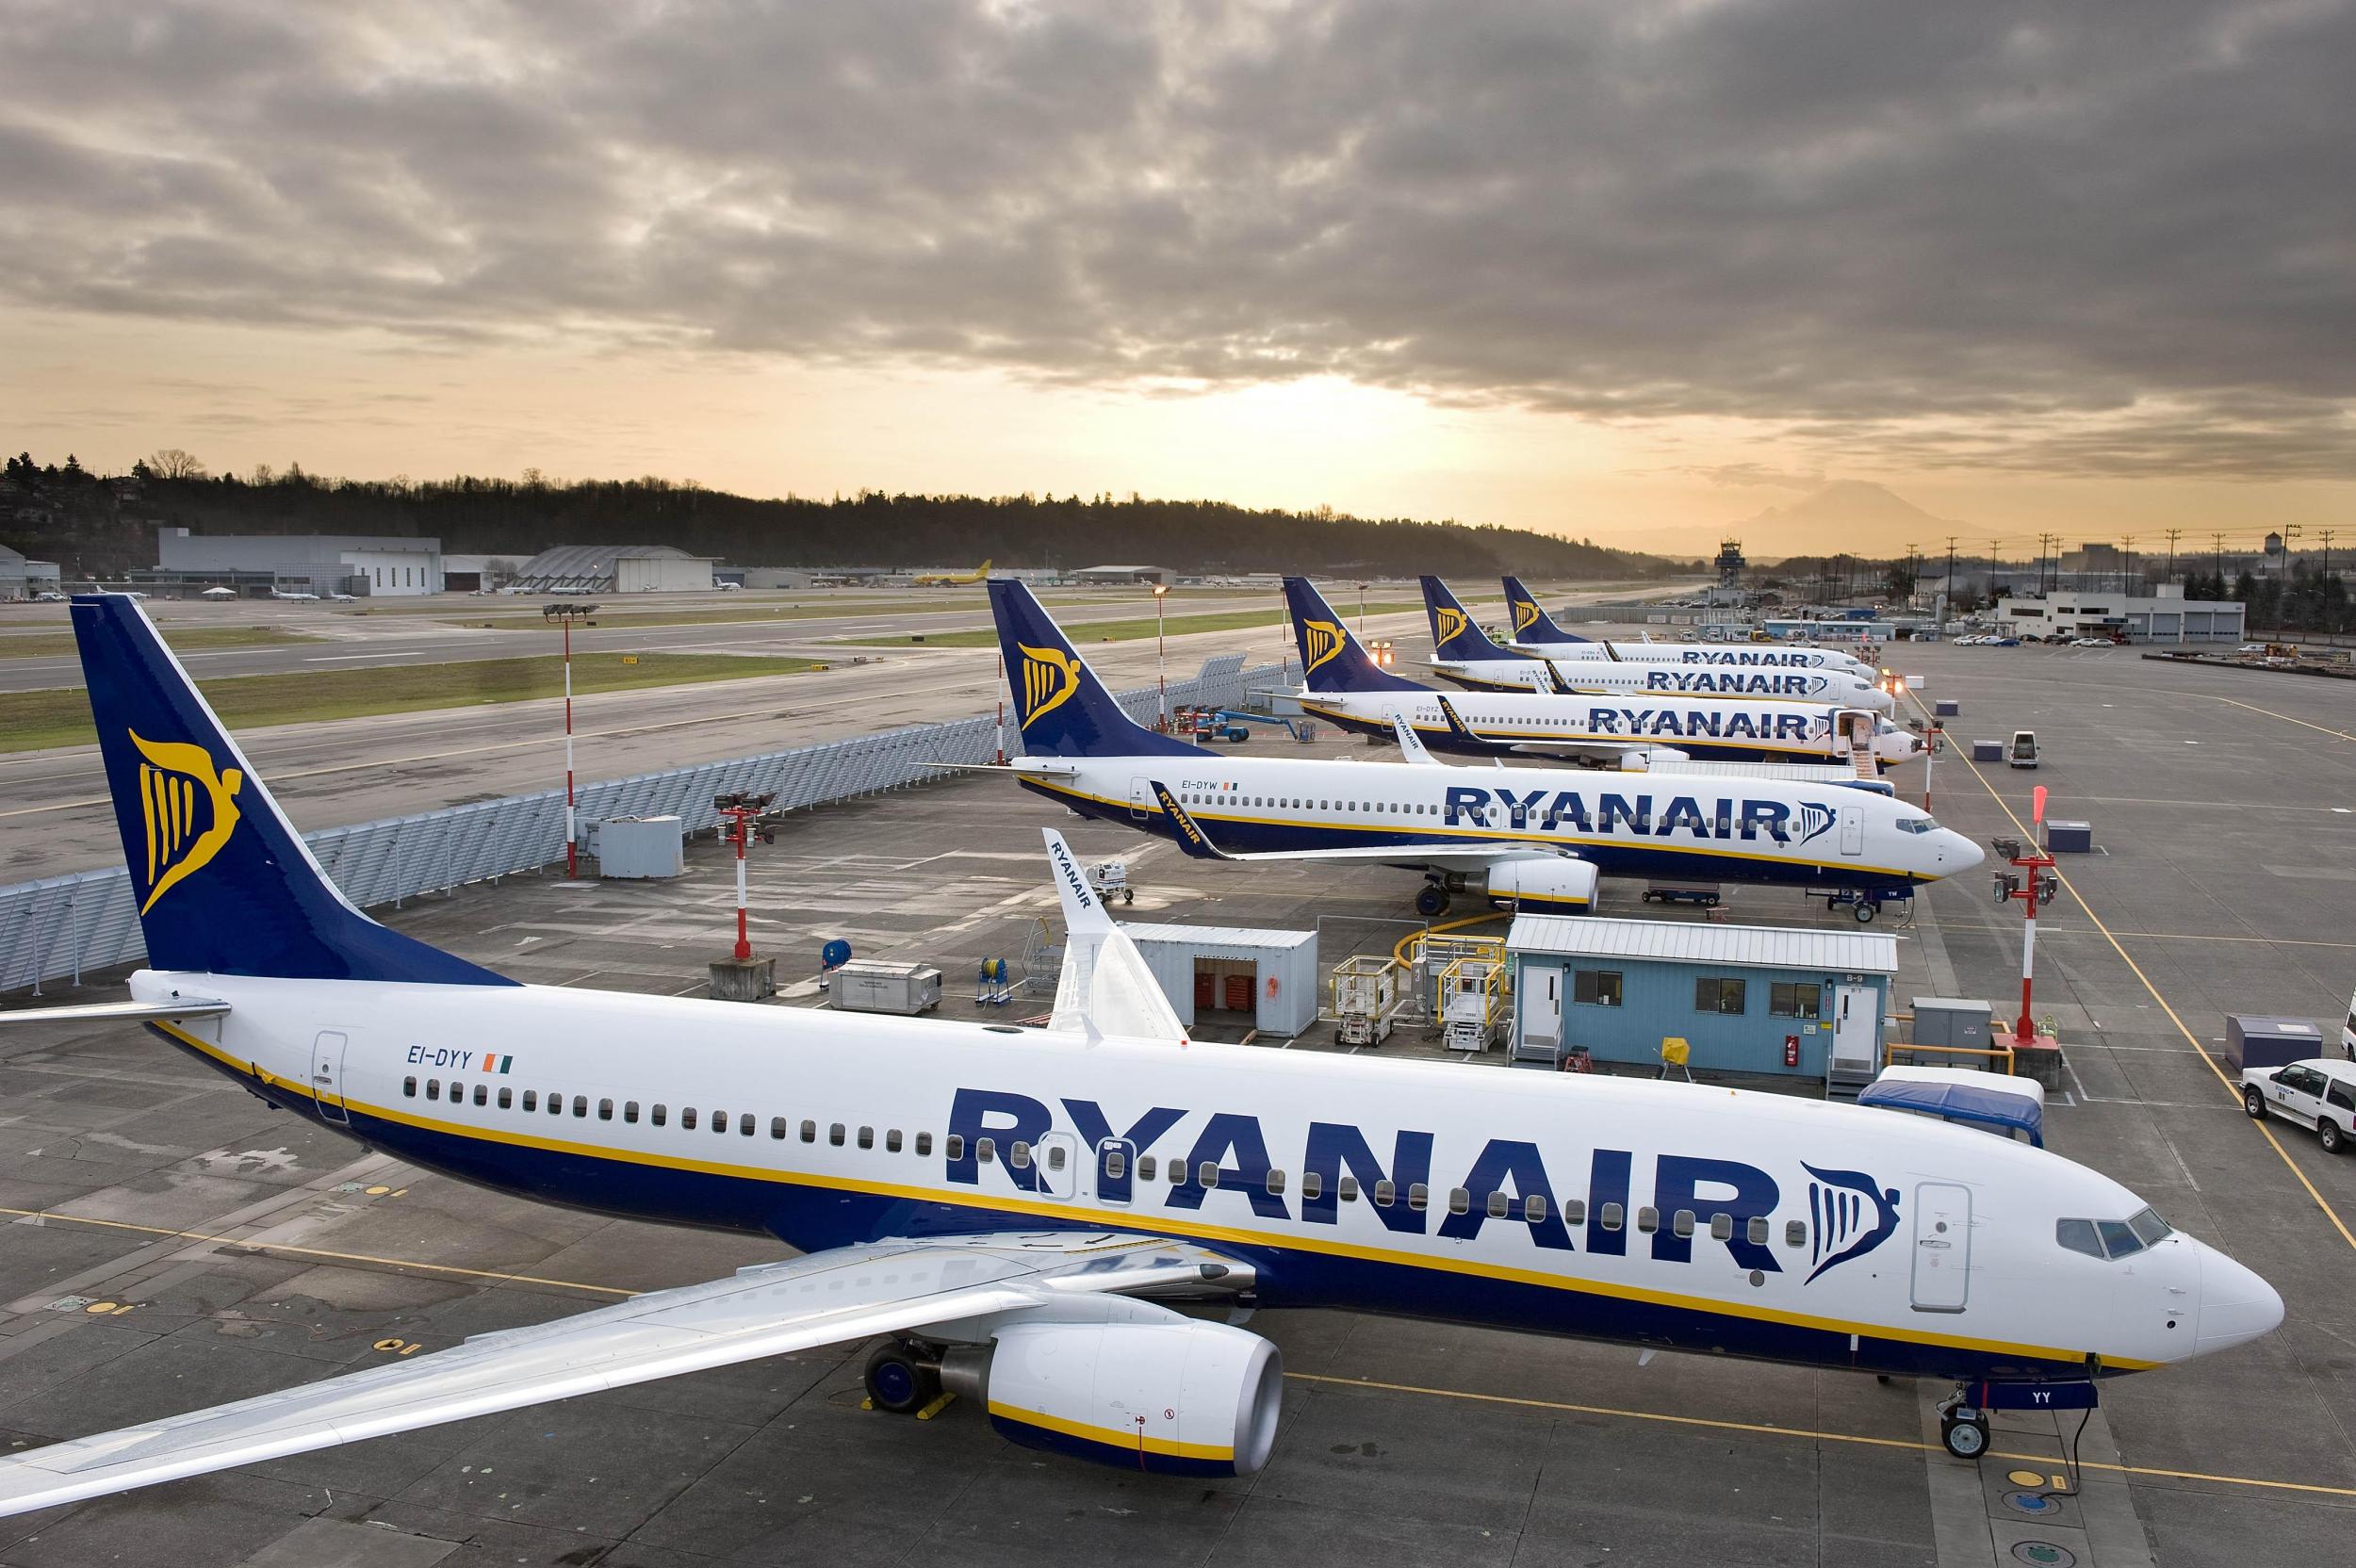 Ground stop? Ryanair pilots based in the UK are being balloted on industrial action